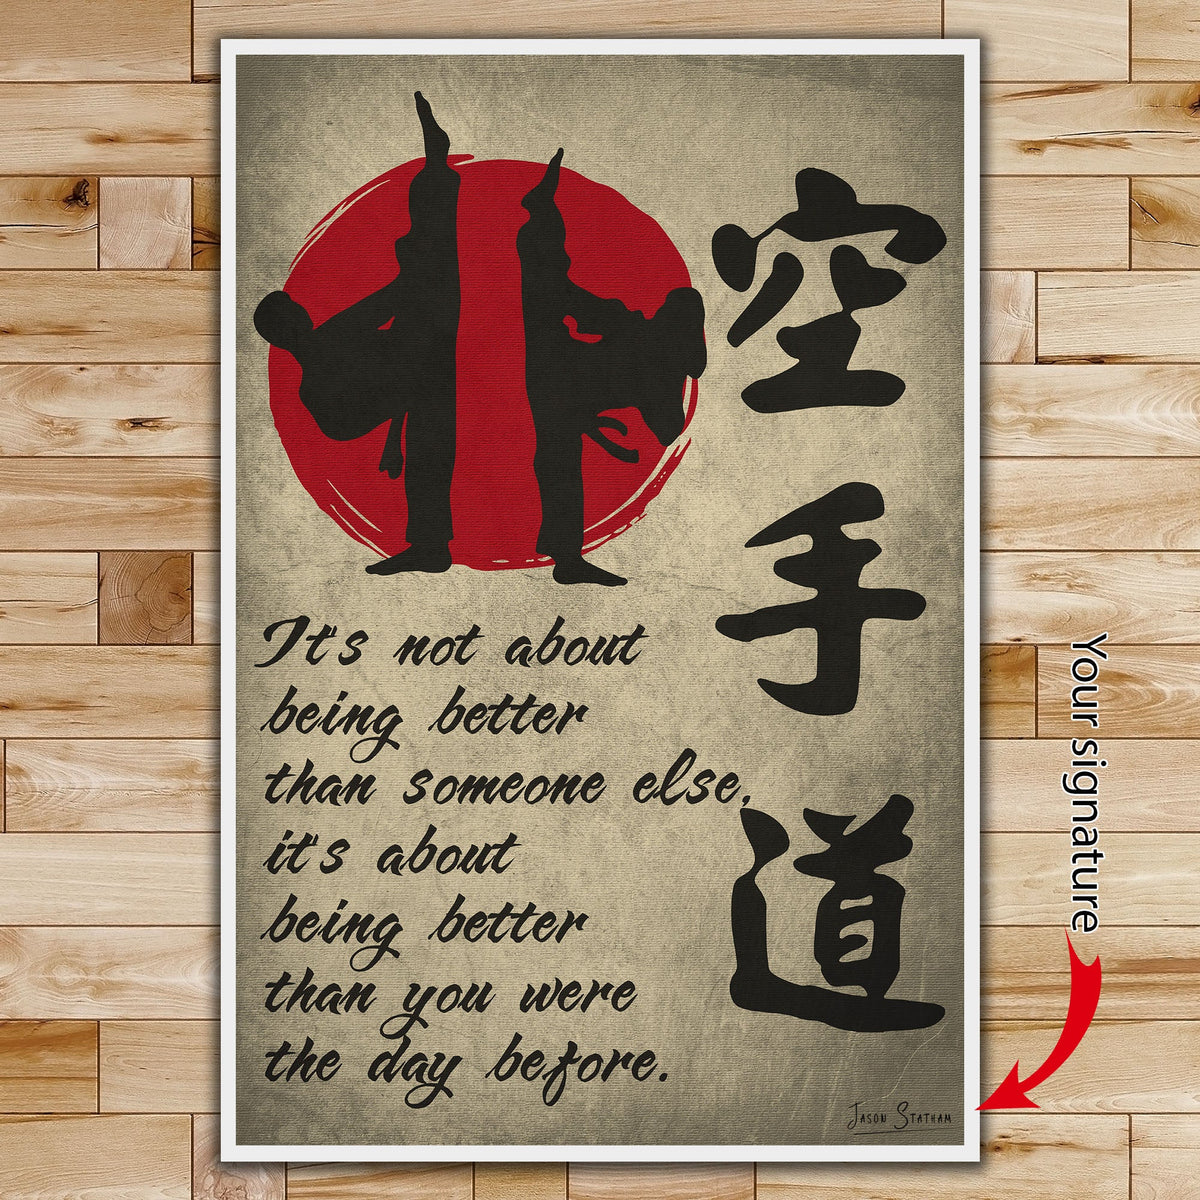 KA008 - It's Not About Being Better Than Someone Else - It's About Being Better Than You Were The Day Before - Karatedo  - Vertical Poster - Vertical Canvas - Karate Poster - Karate Canvas